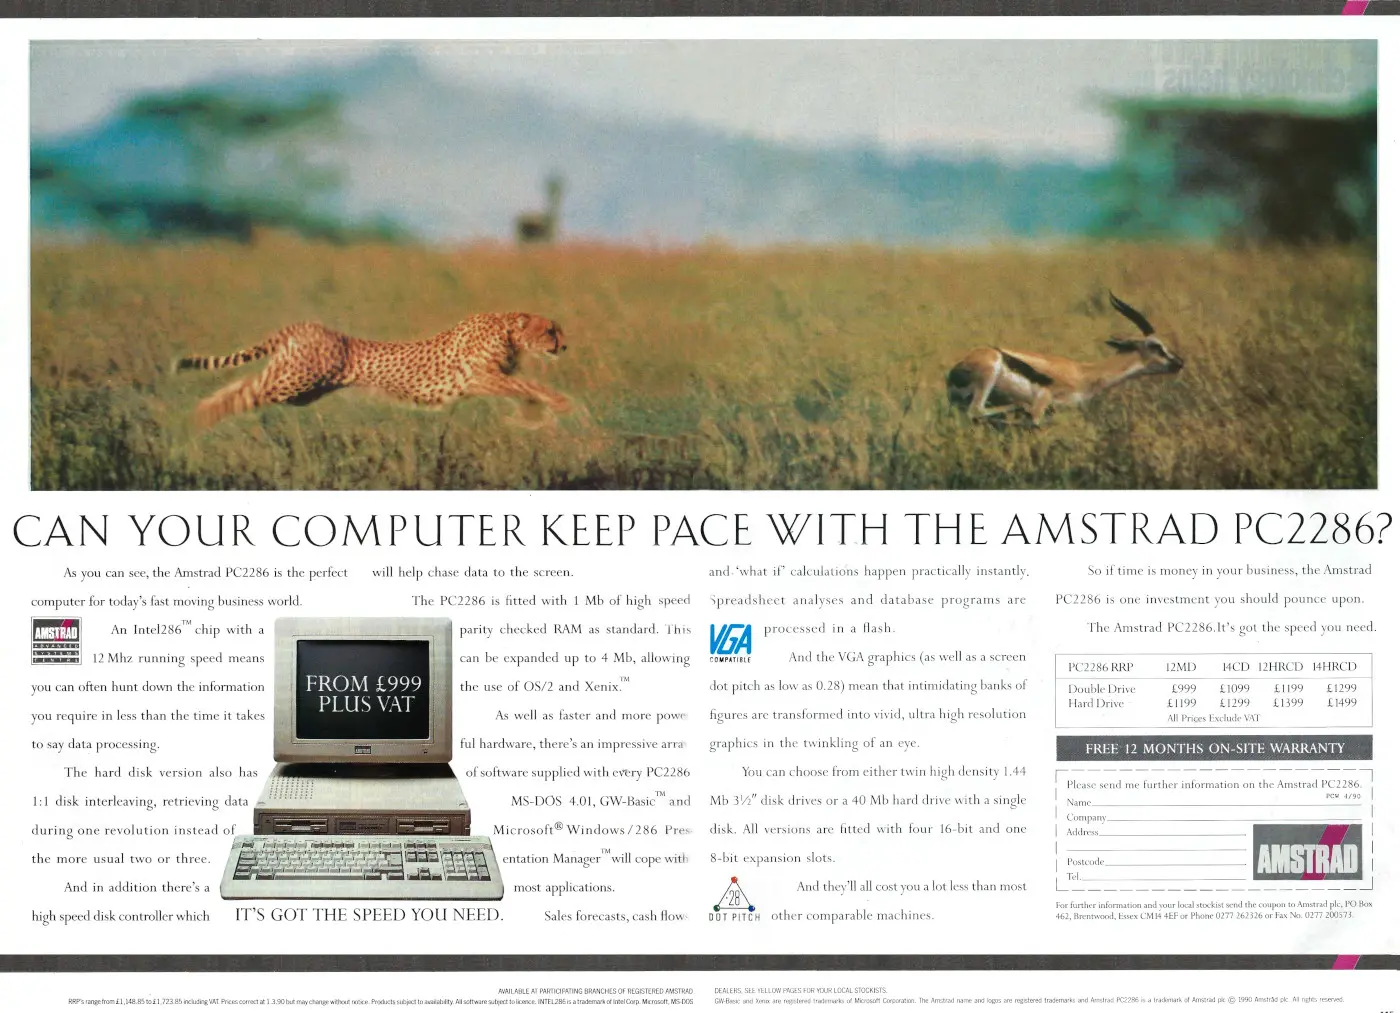 Amstrad Advert: Can your computer keep pace with the Amstrad PC2286?, from Personal Computer World, April 1990